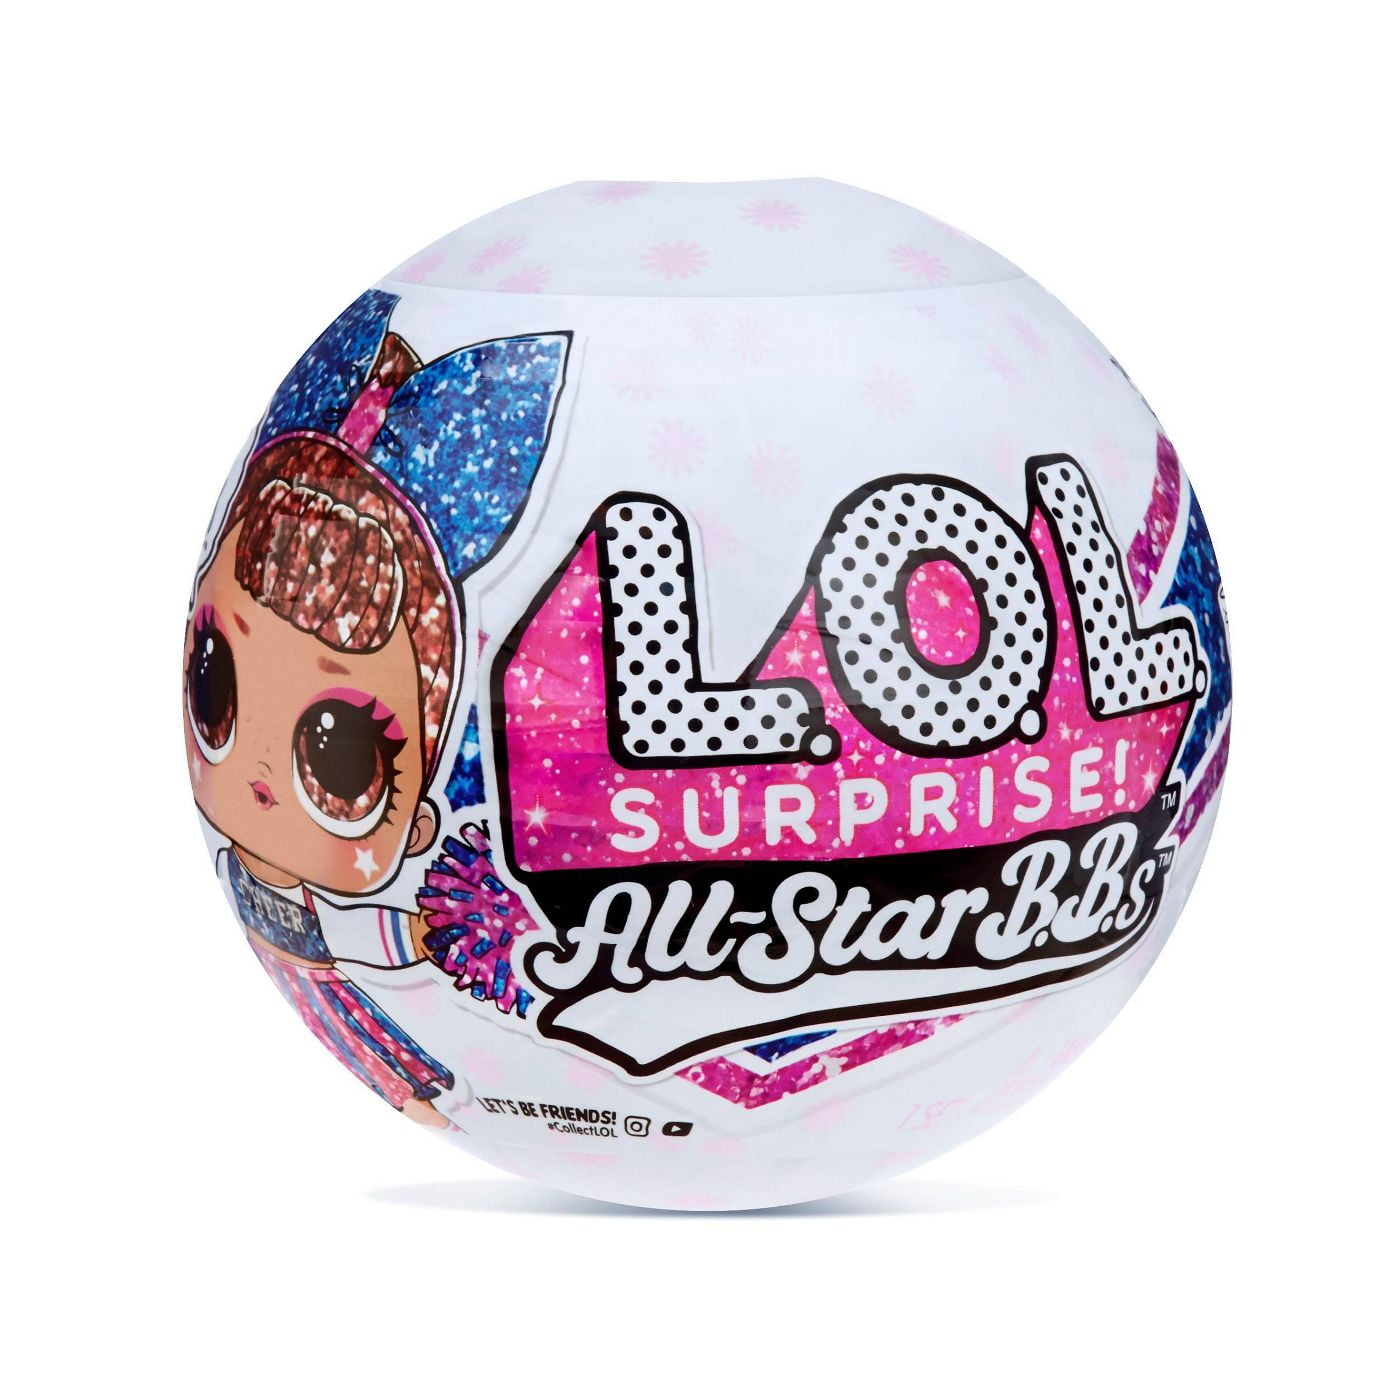 L.o.l. Surprise All-star B.b.s Stores